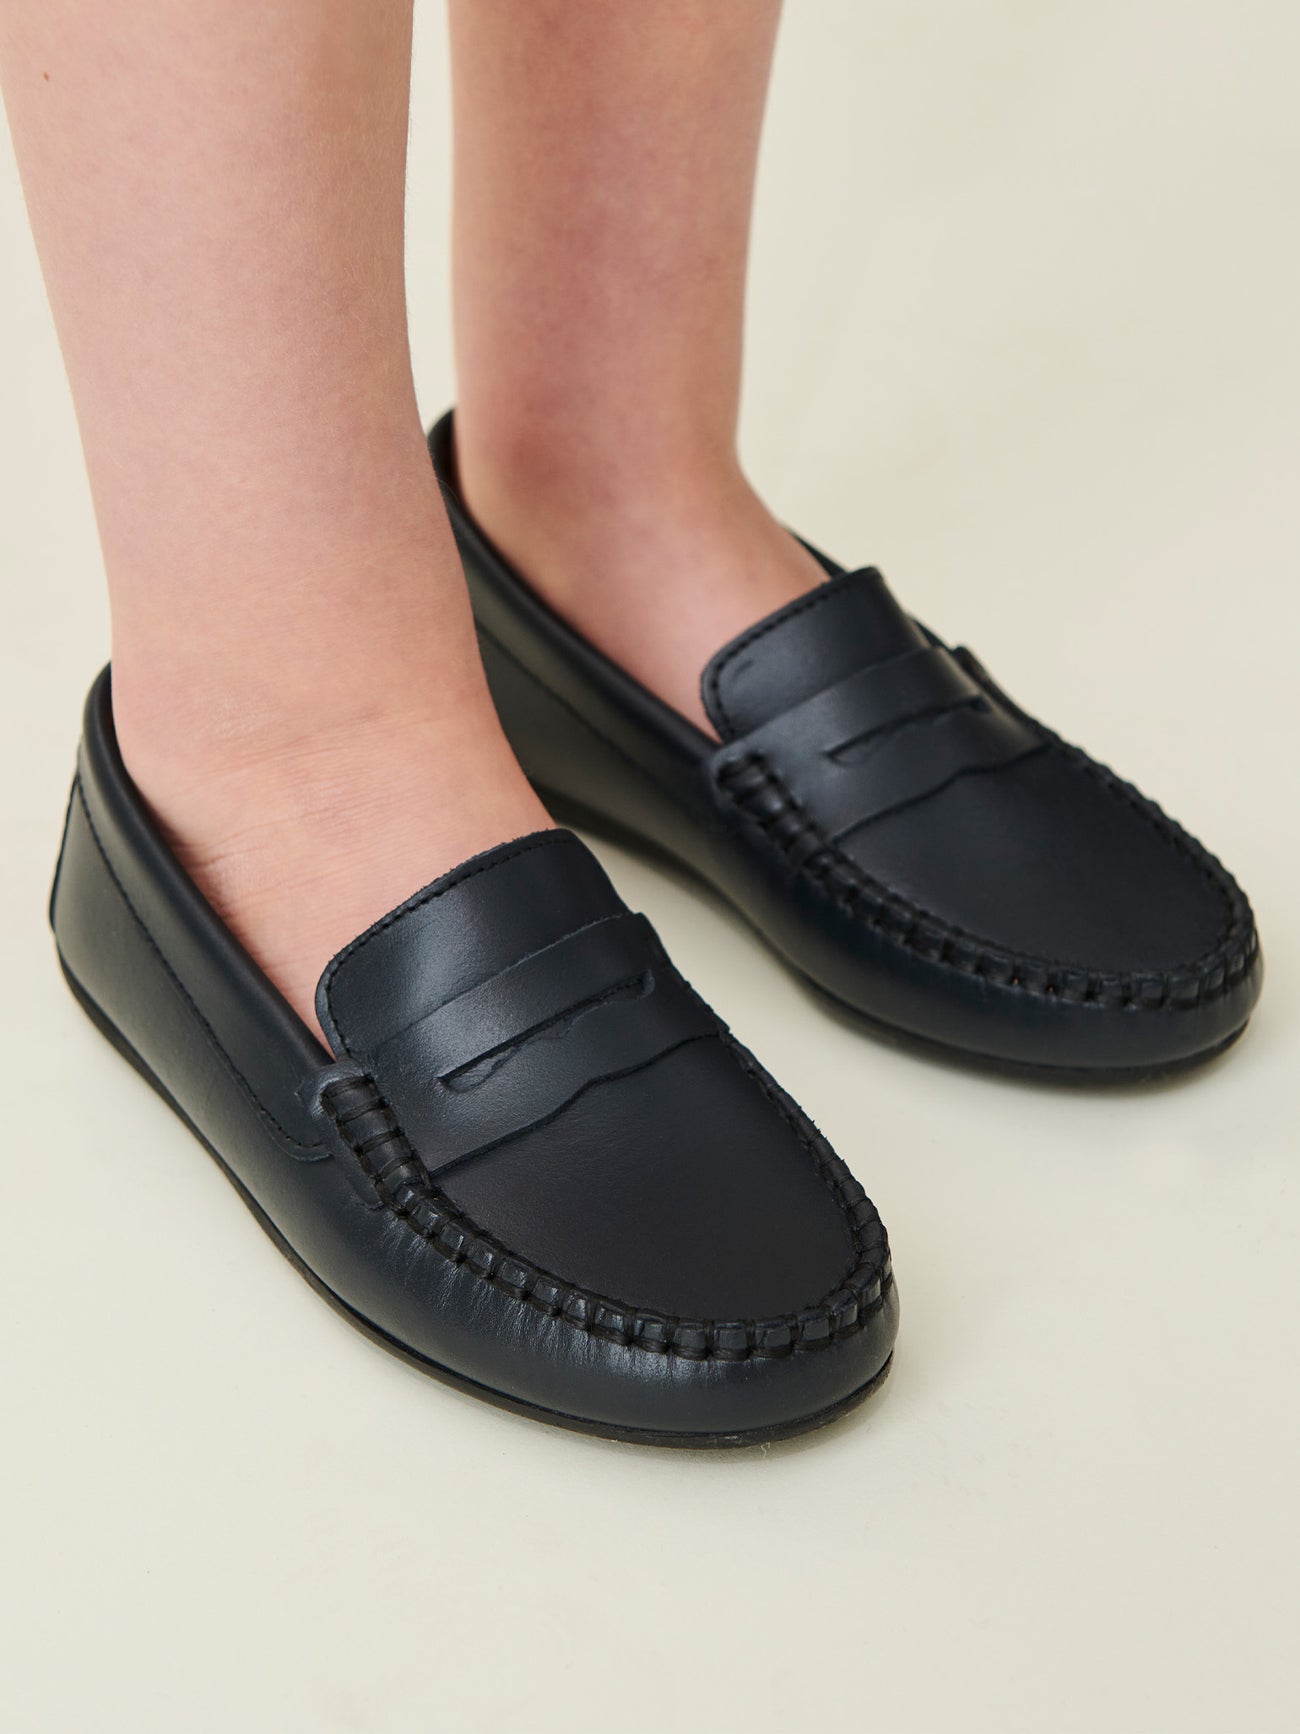 Navy Leather Boy Loafer Shoes